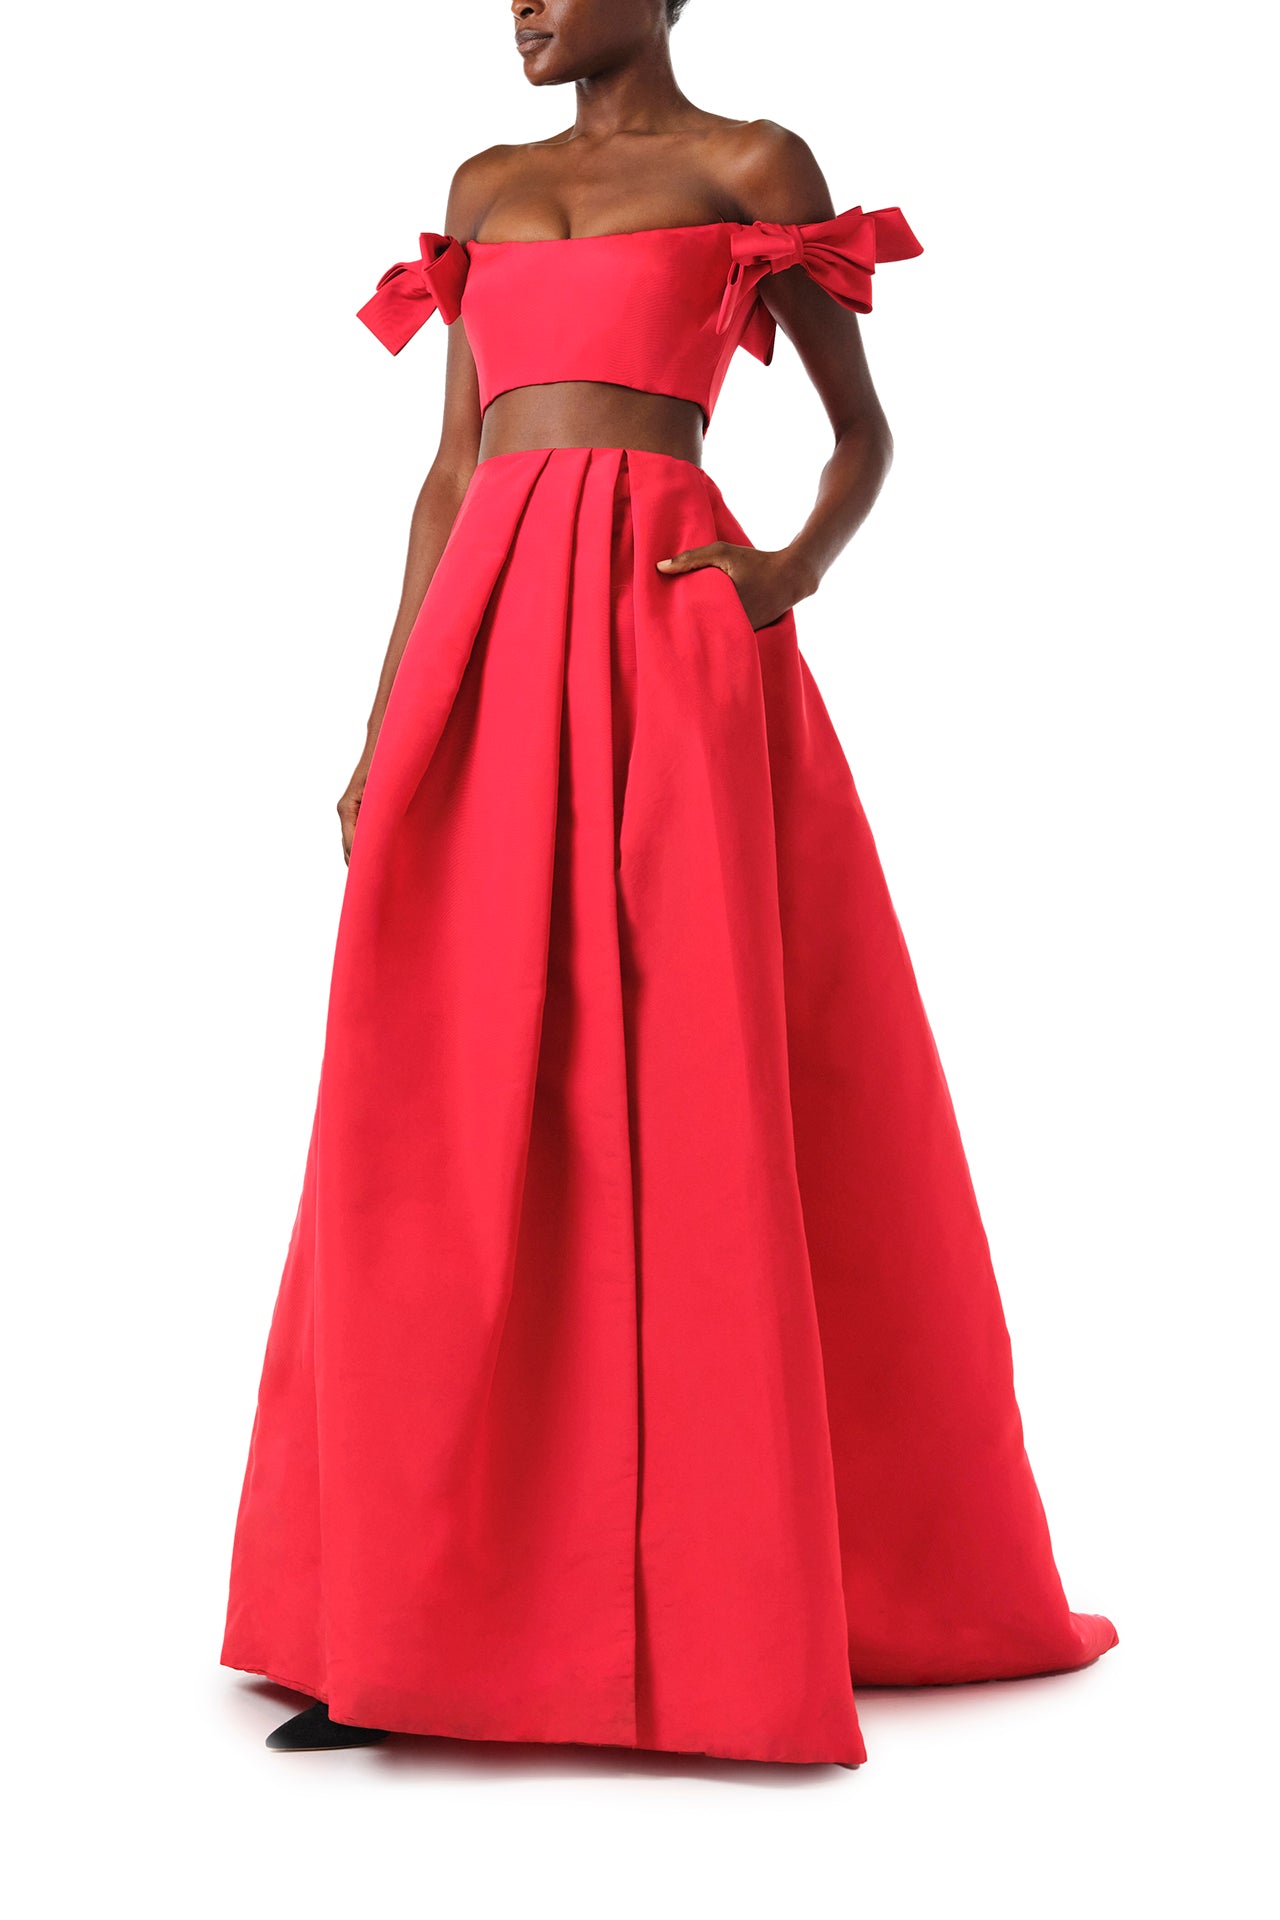 Monique Lhuillier Fall 2024 scarlet red faille pleated ballgown skirt with high front slit and pockets - front with hand in pocket.